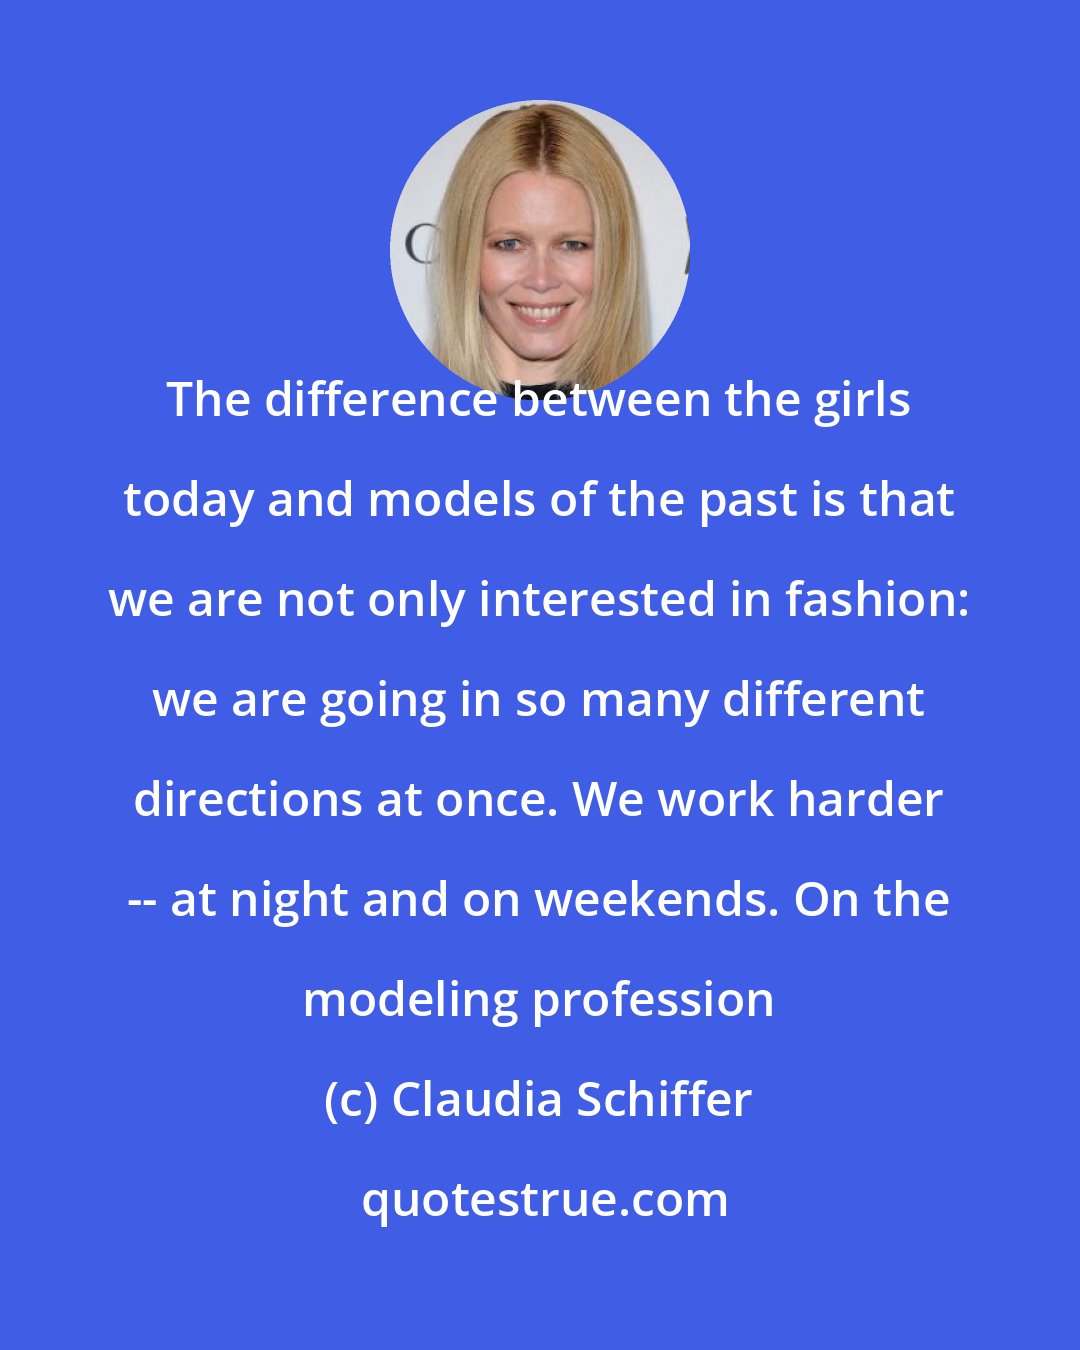 Claudia Schiffer: The difference between the girls today and models of the past is that we are not only interested in fashion: we are going in so many different directions at once. We work harder -- at night and on weekends. On the modeling profession